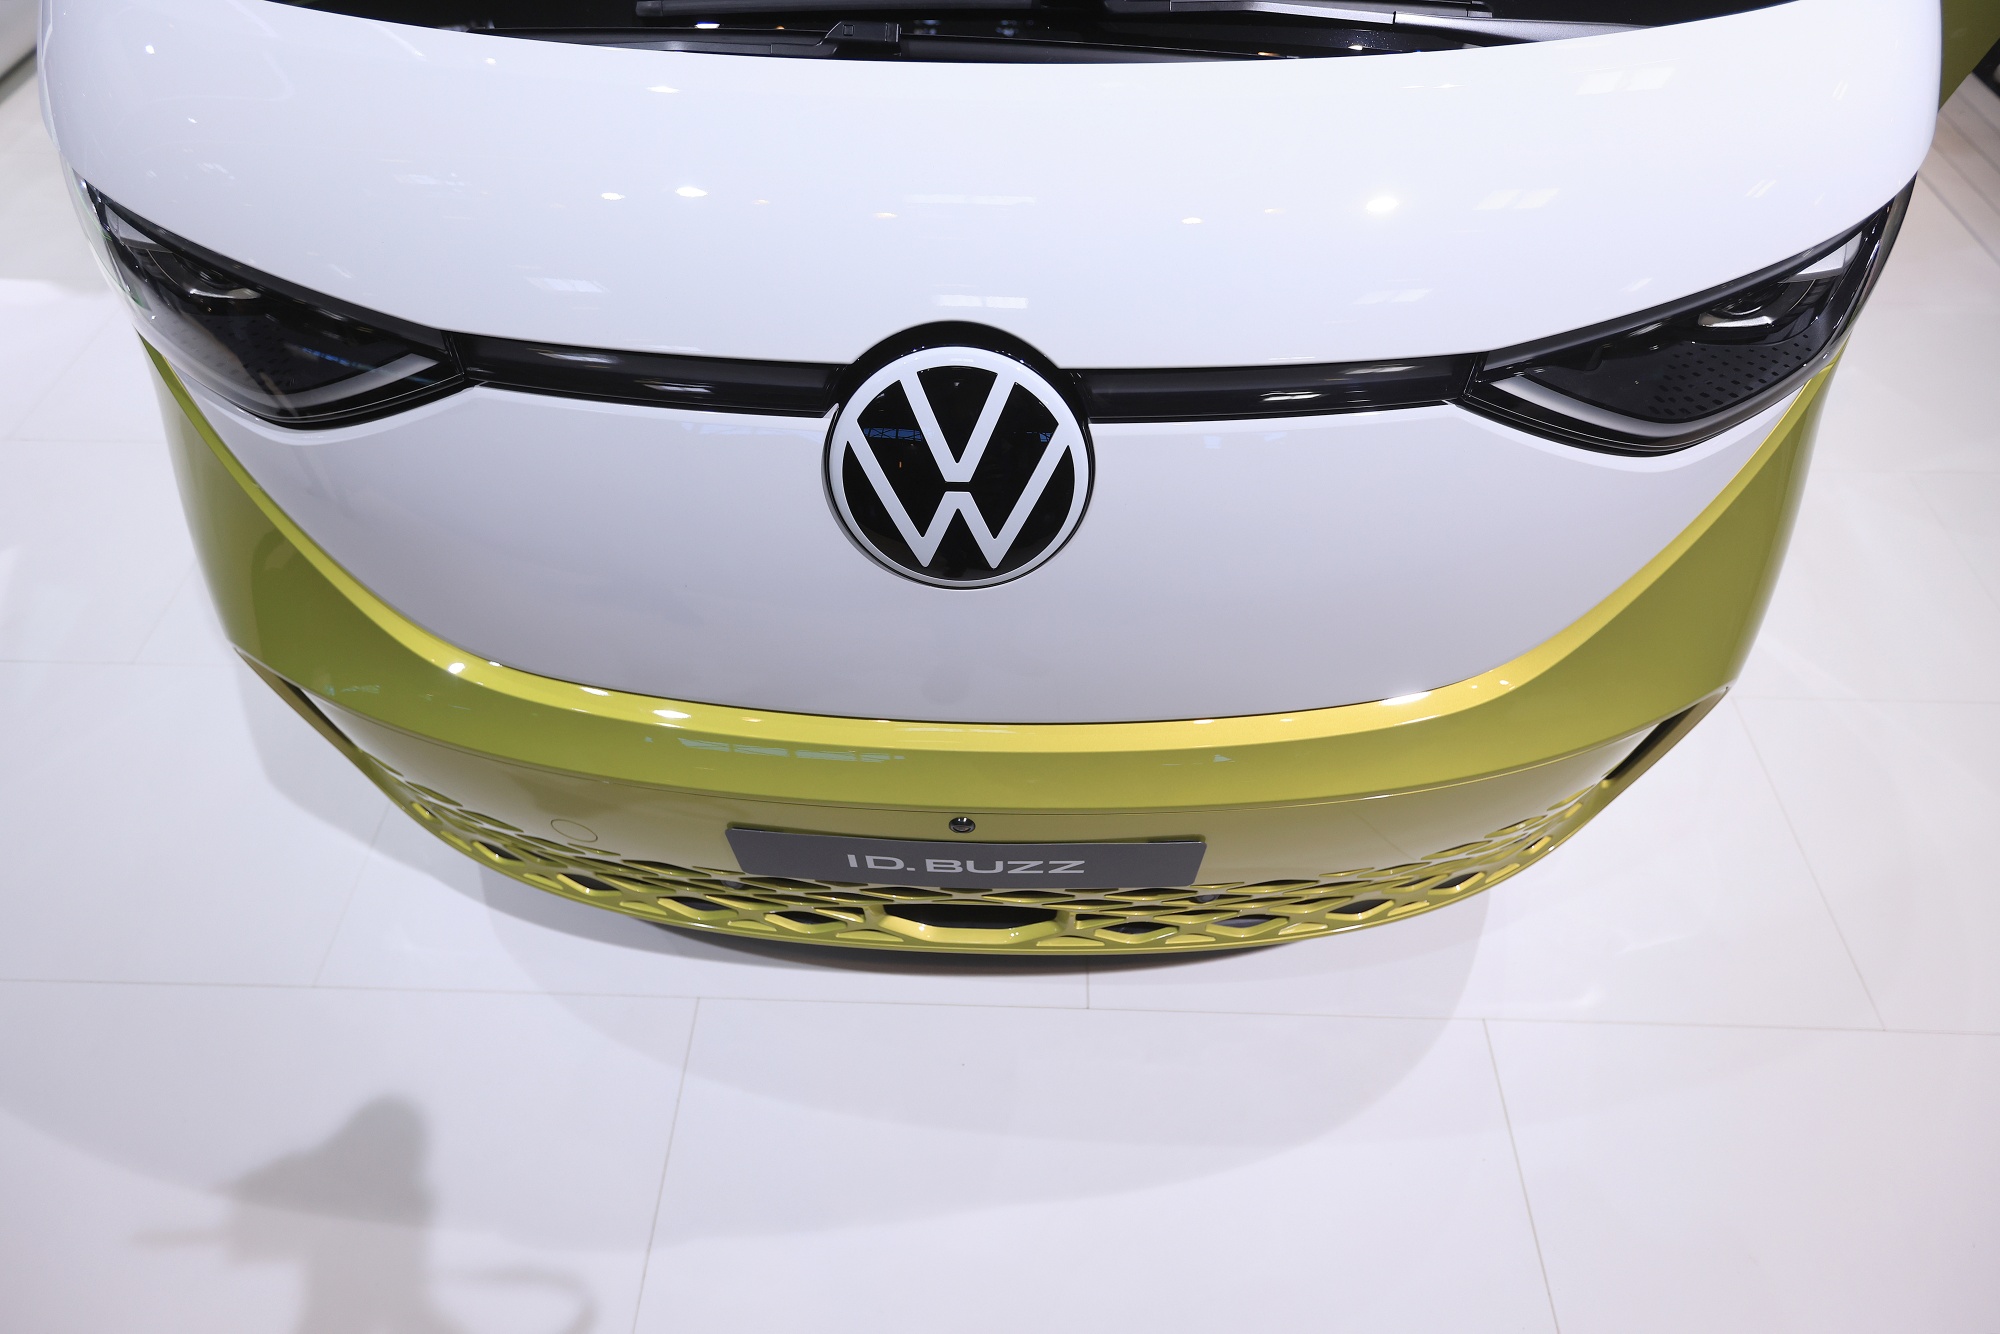 Volkswagen's New Electric Car Orders Miss Company Target - Bloomberg